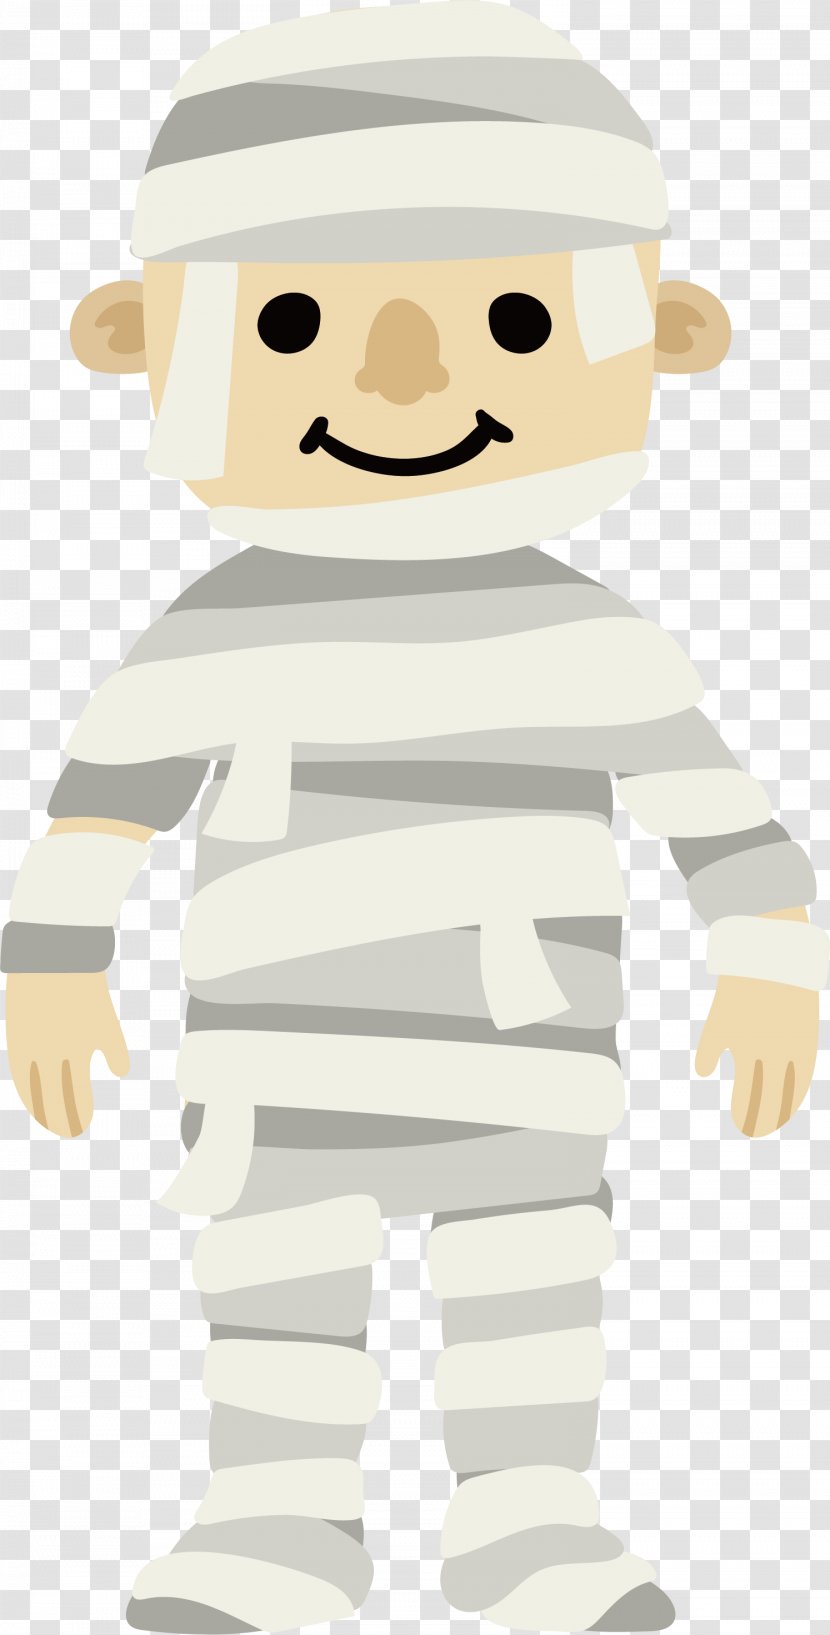 A Bandaged Mummy - Bitcoin Faucet - Joint Transparent PNG